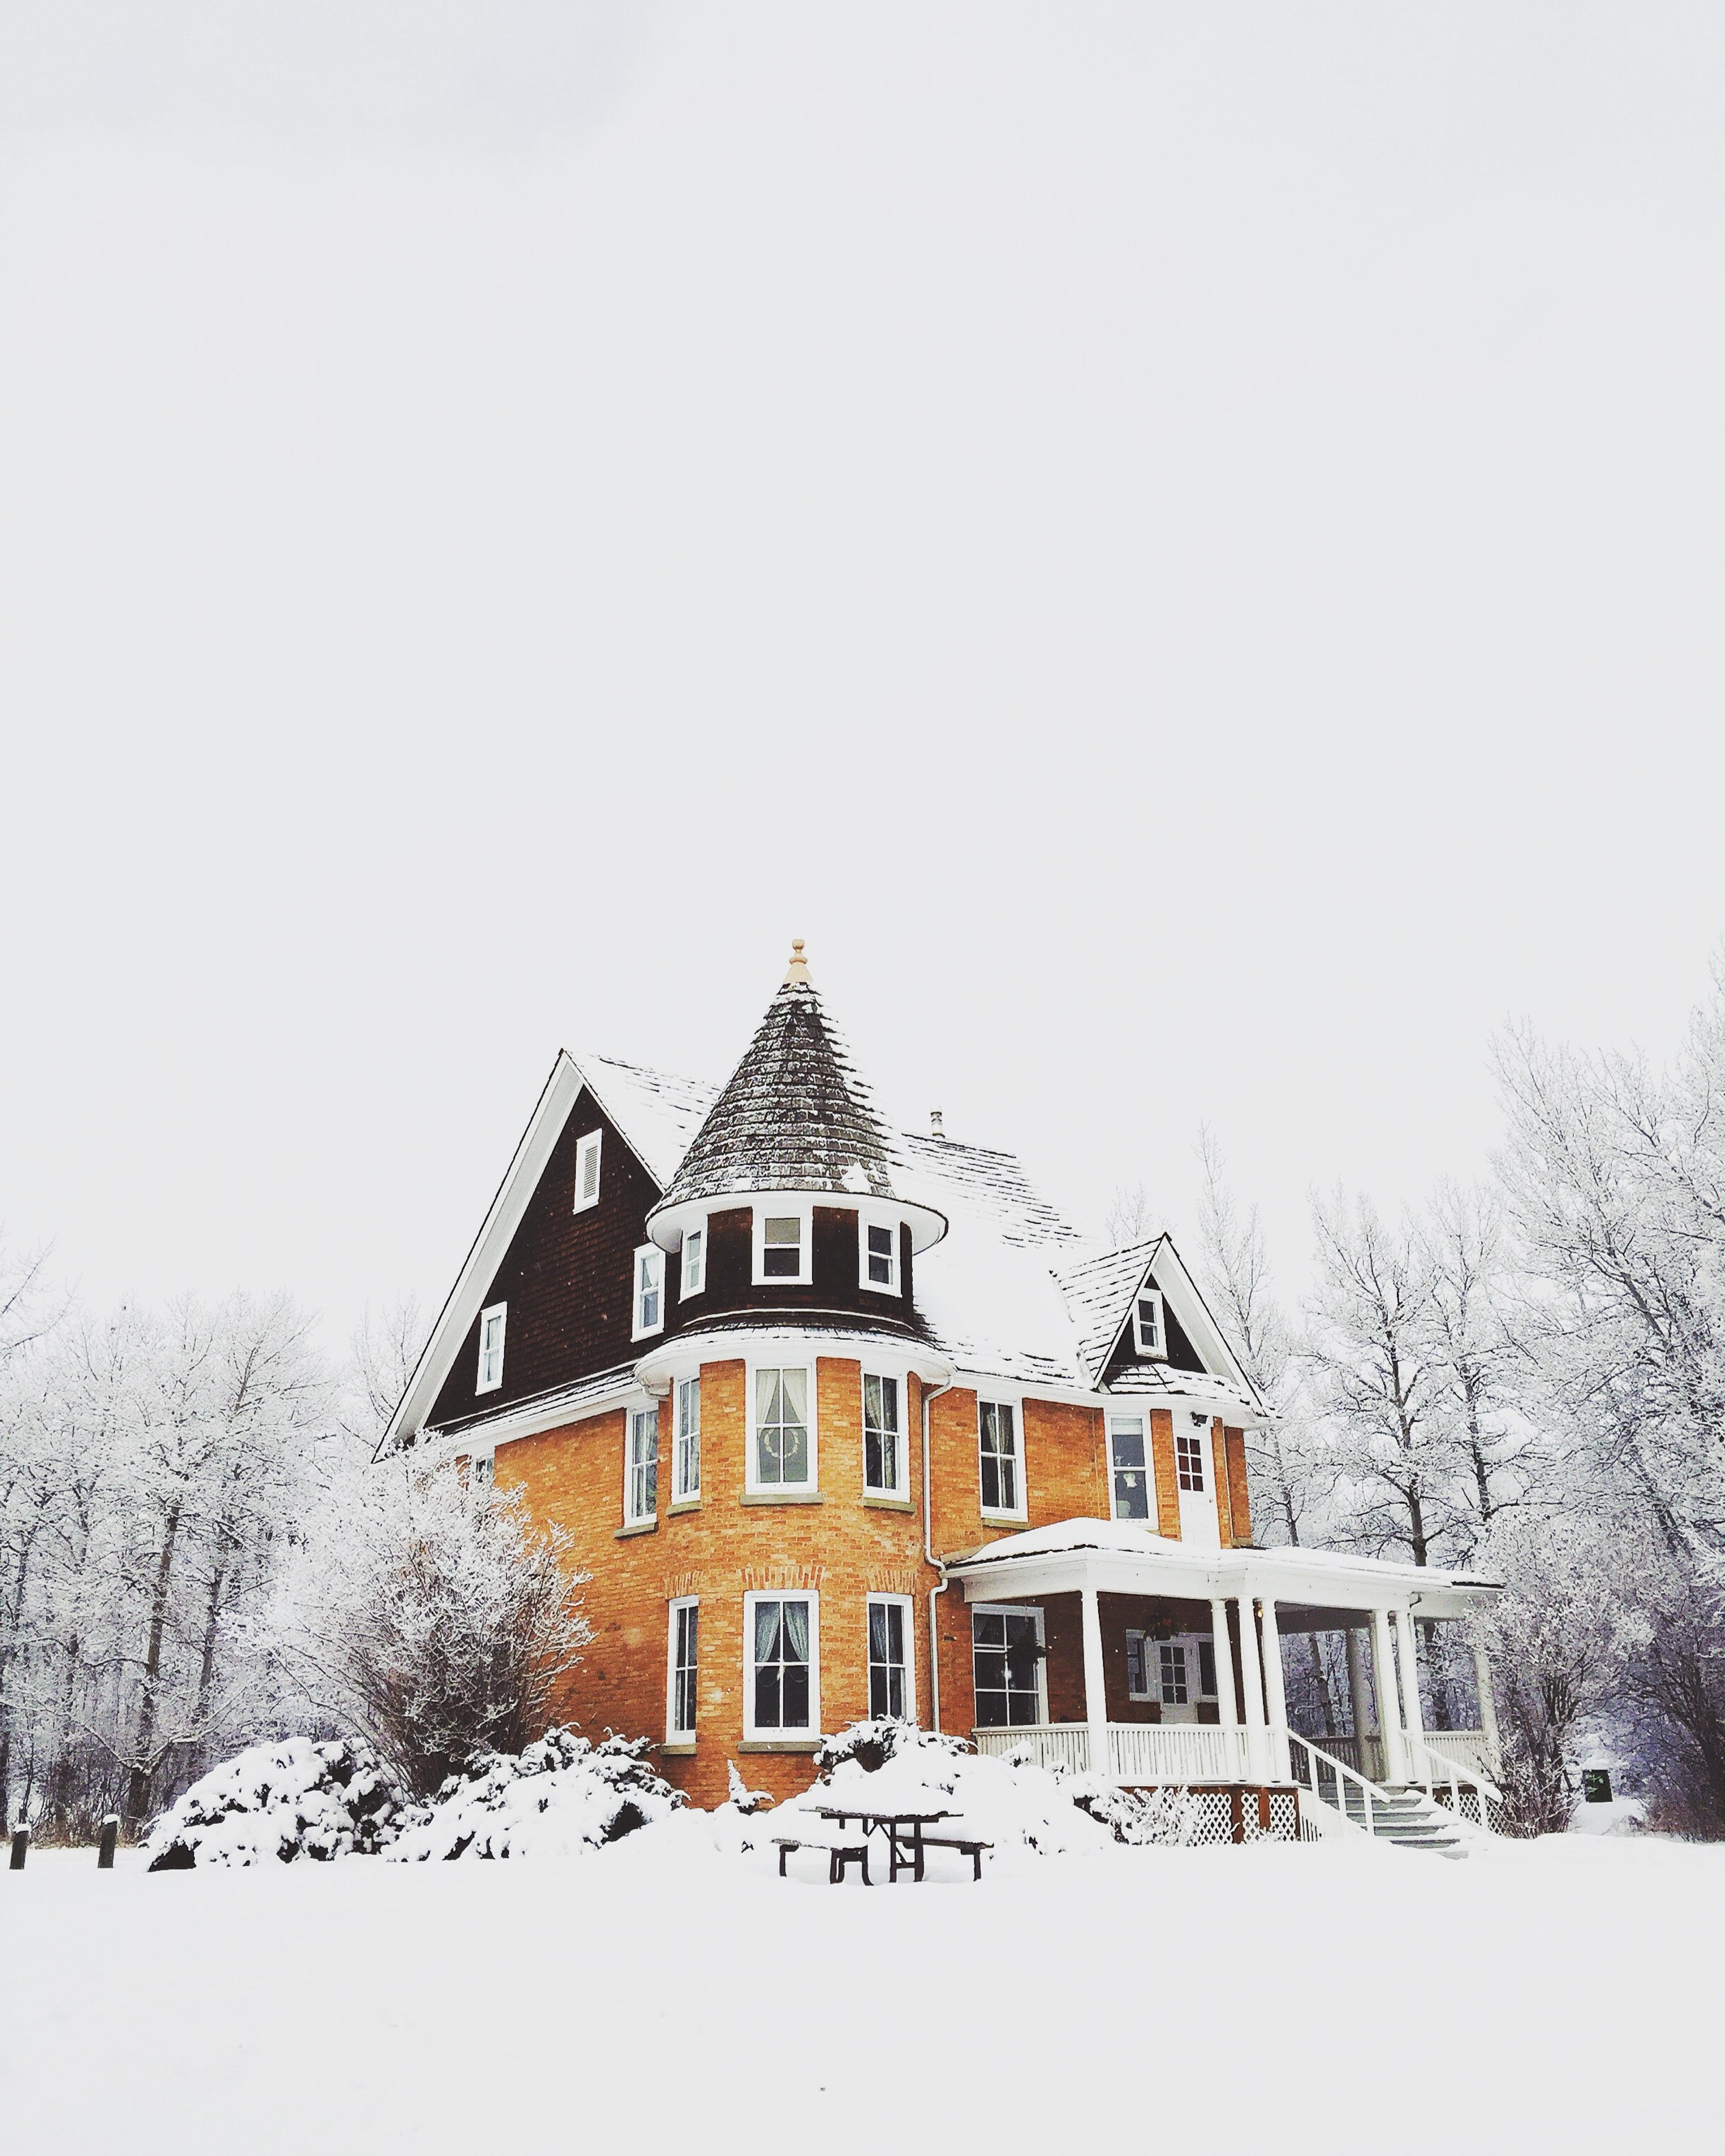 A two-story orange house with a pointed roof, surrounded by snow-covered trees and a white snowy ground, under a cloudy winter sky.